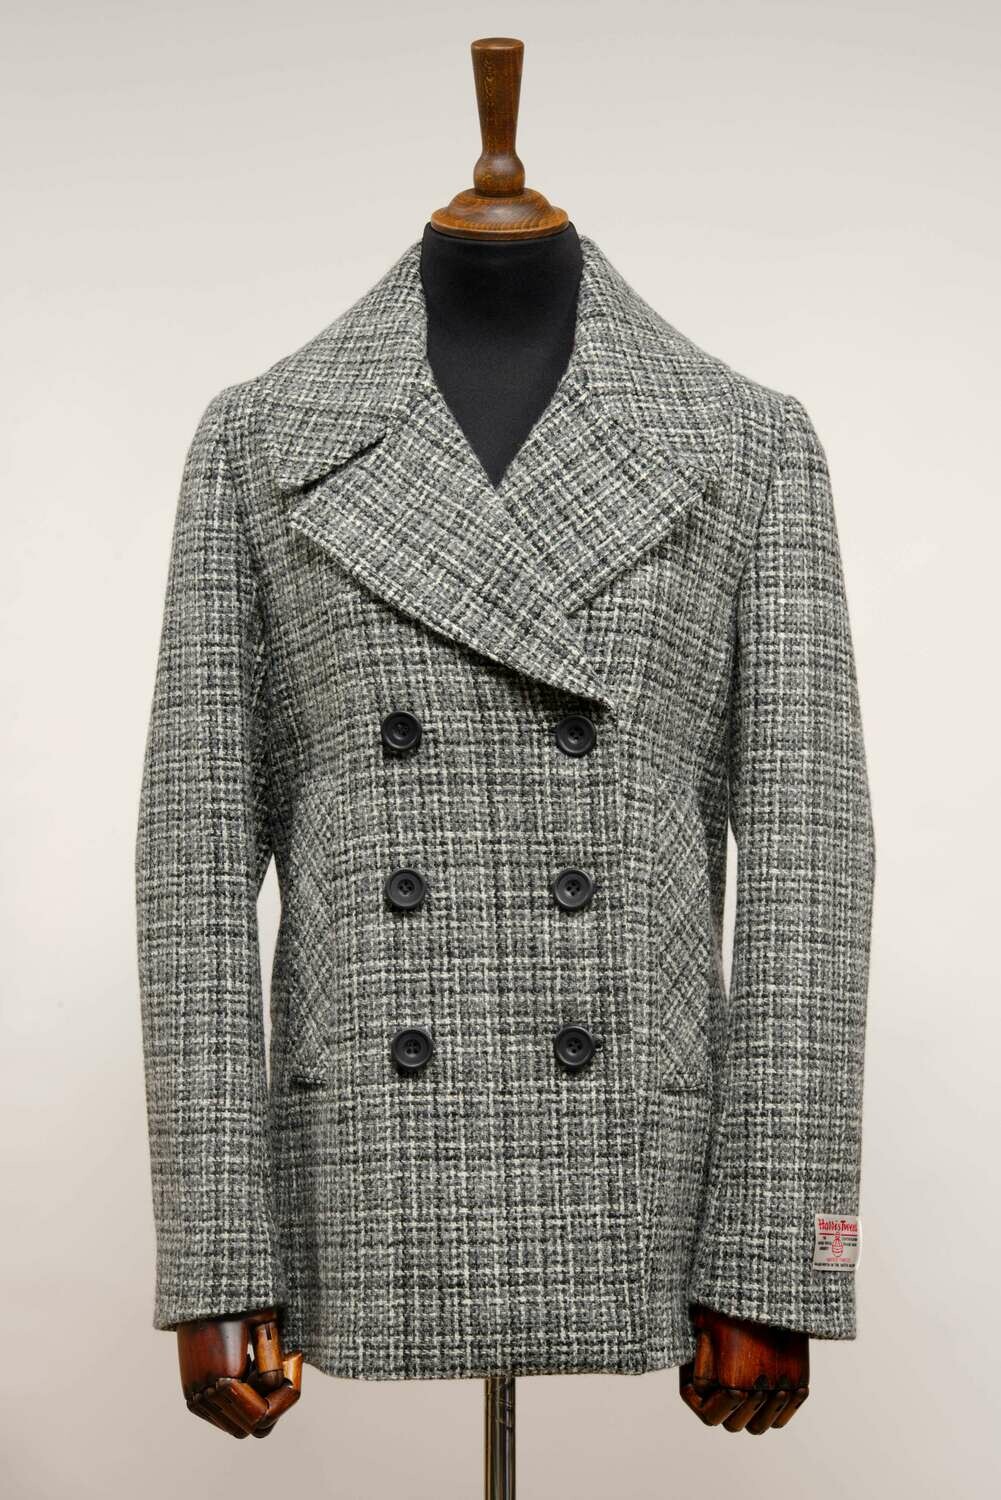 Pea coat, another naval classic for autumn and winter